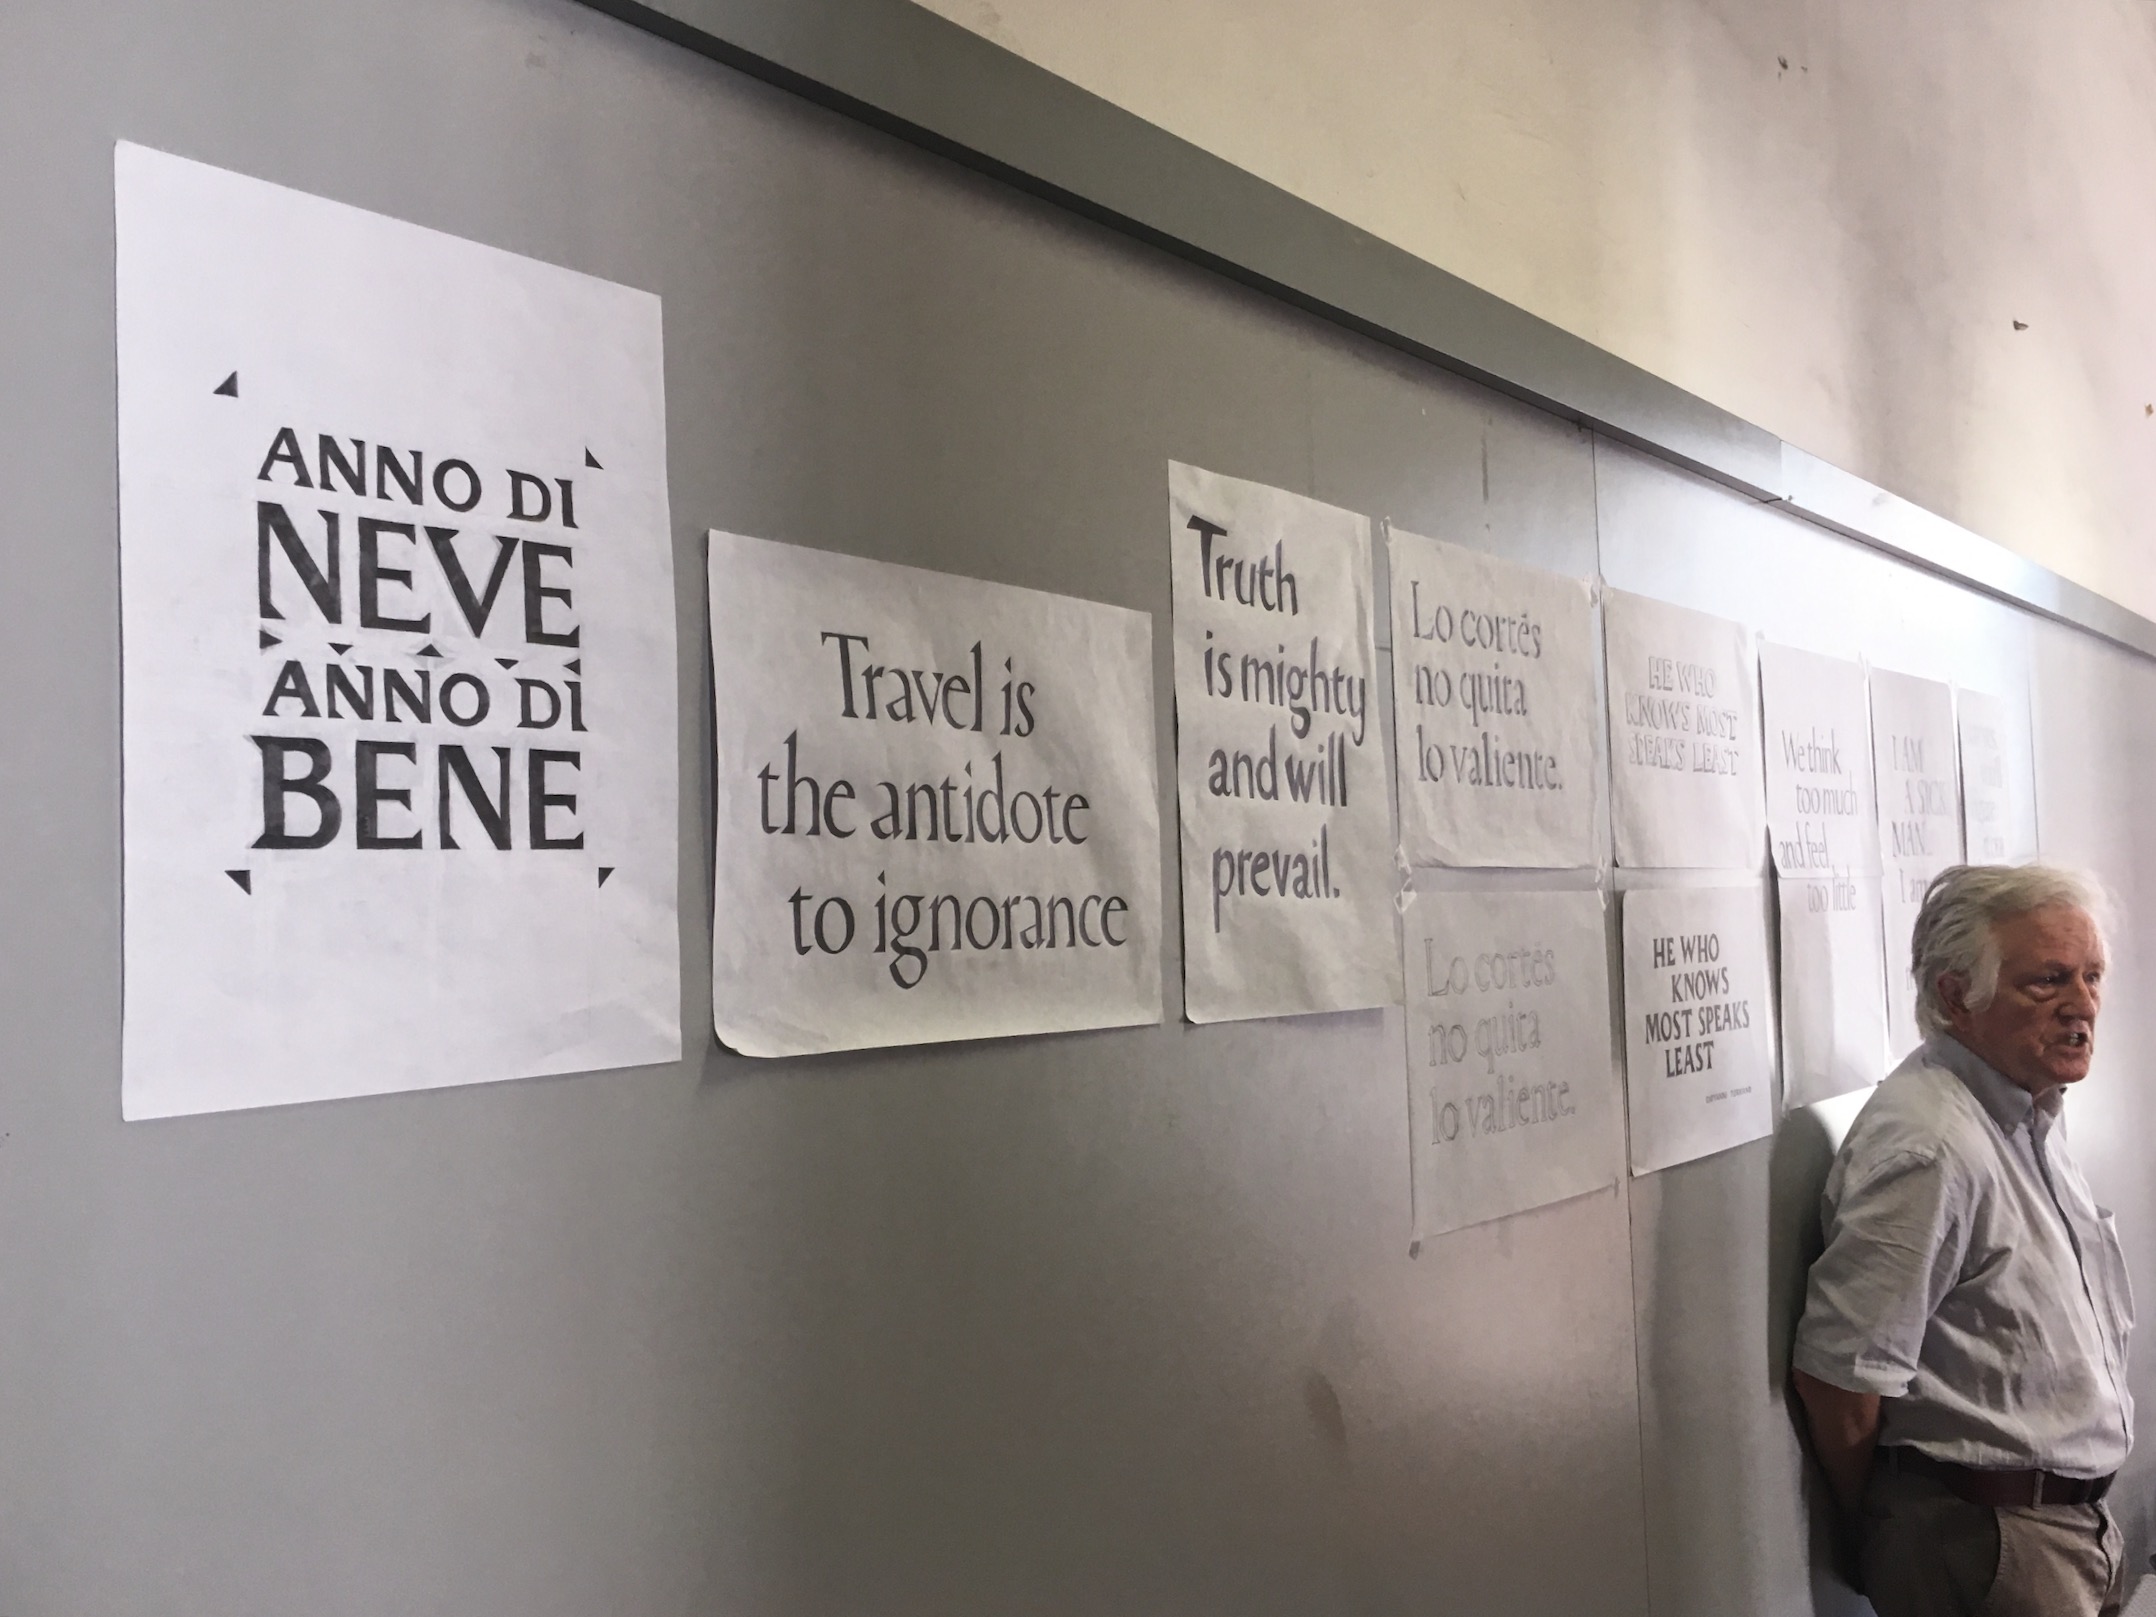 A wall with papers on it that contain different styles of writing and text.